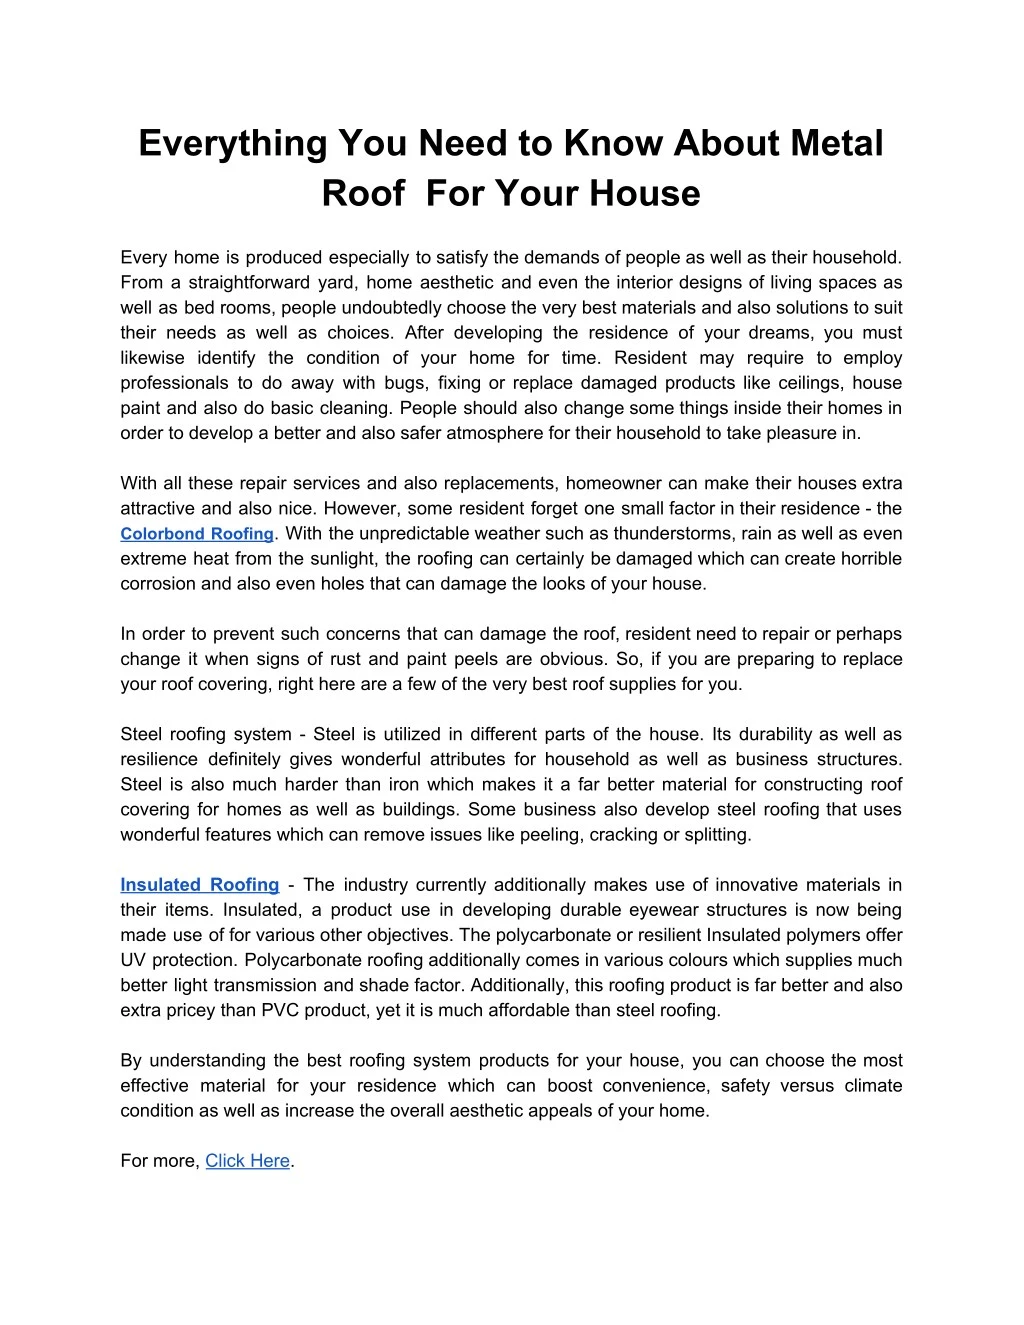 everything you need to know about metal roof